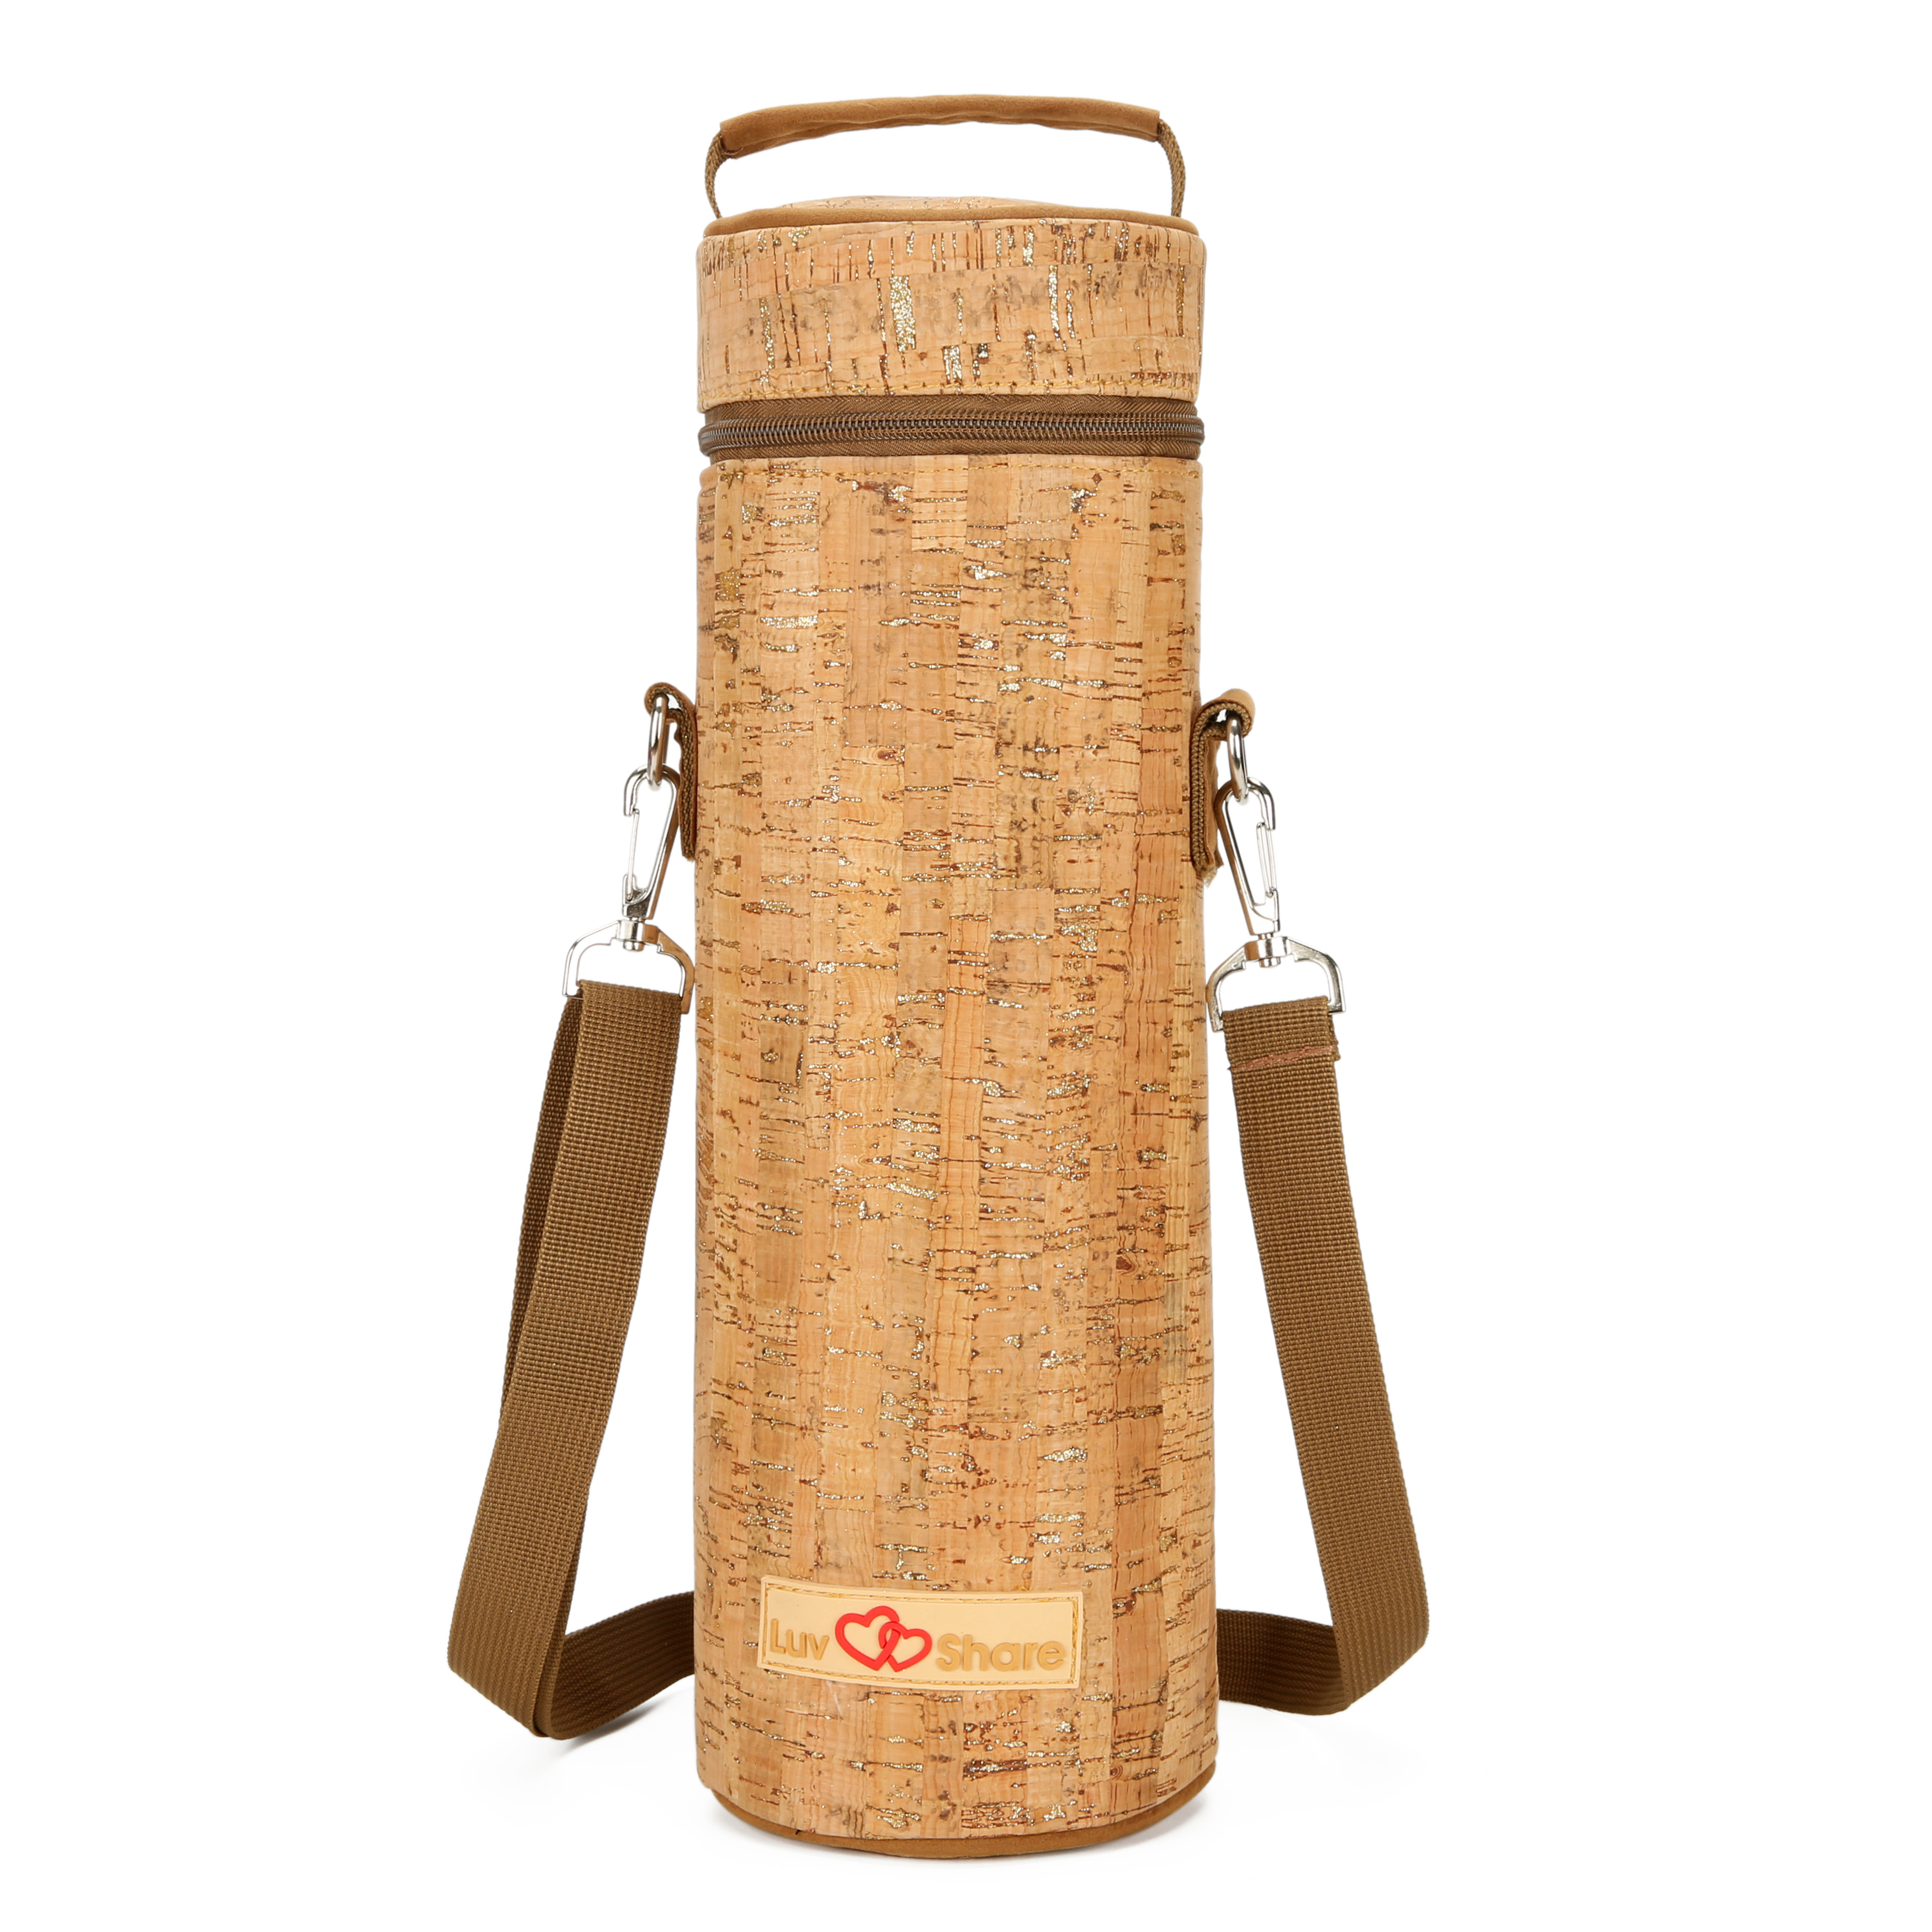  Insulated Wine Carrier Tote Cork wine cooler bags